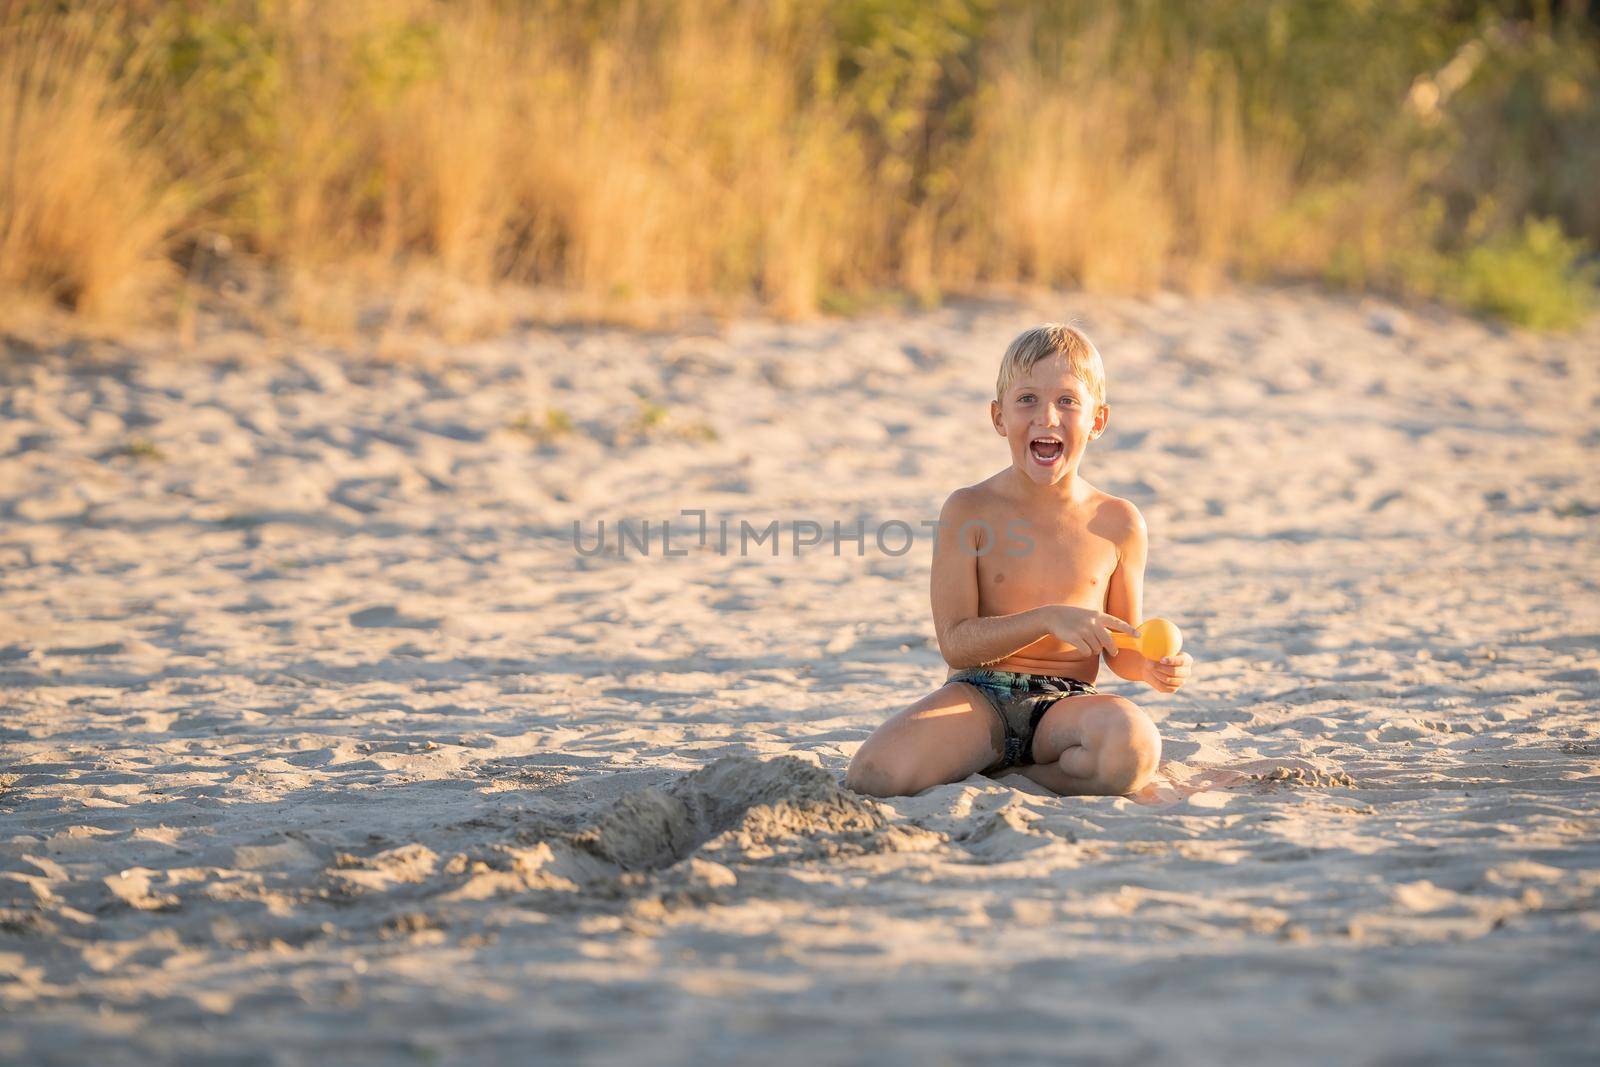 child laughing on the beach summer holidays by Robertobinetti70